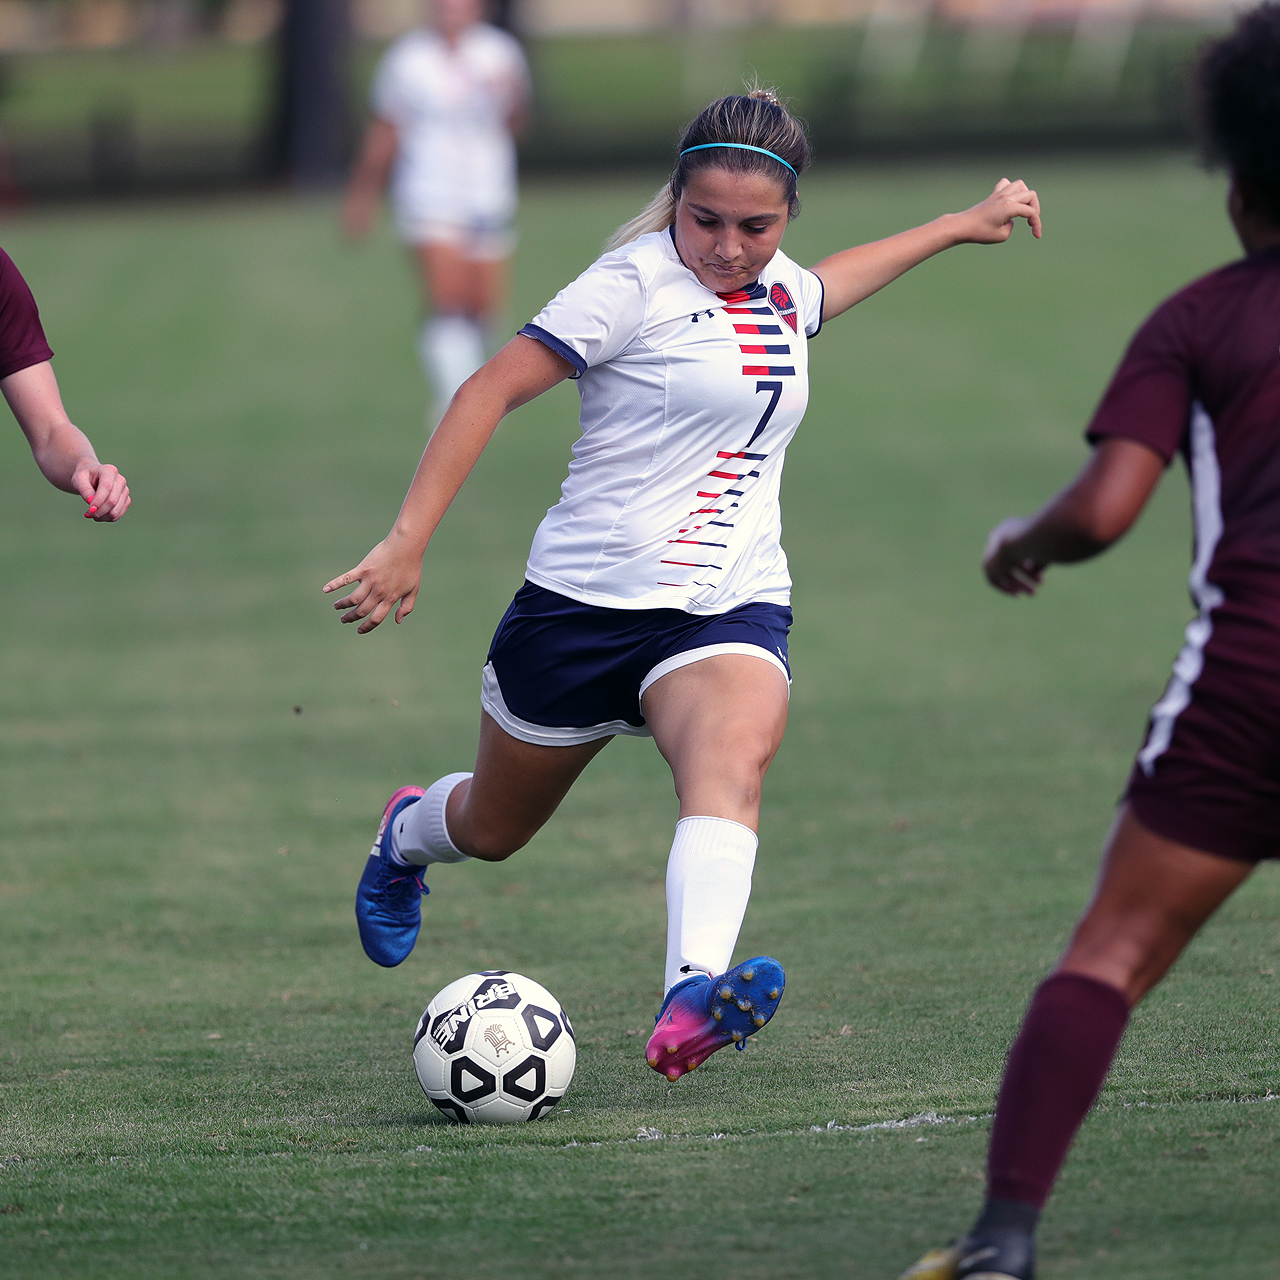 Lady Indians dominate Southwest with 6-0 win in home opener